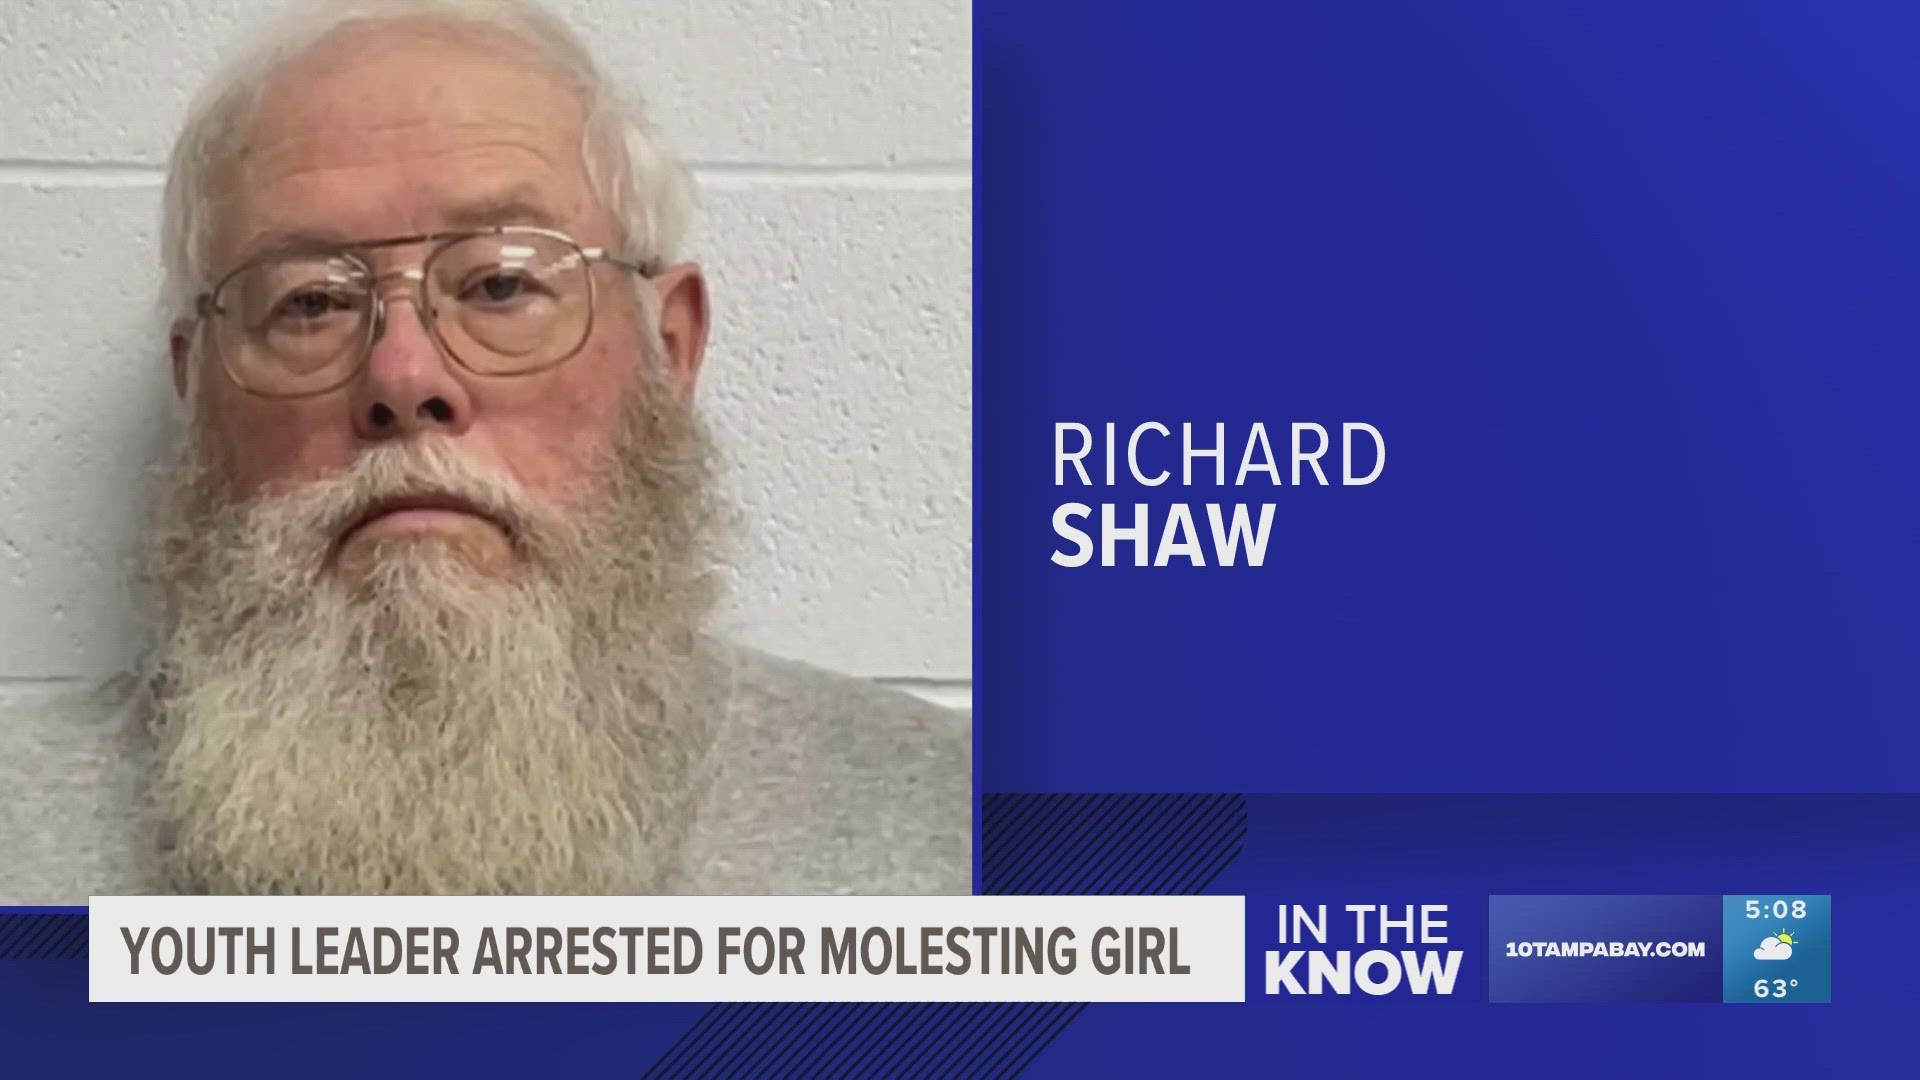 Richard Shaw, 69, admitted both to detectives and to the victim's mother that he had inappropriately touched a girl under 12 years old.